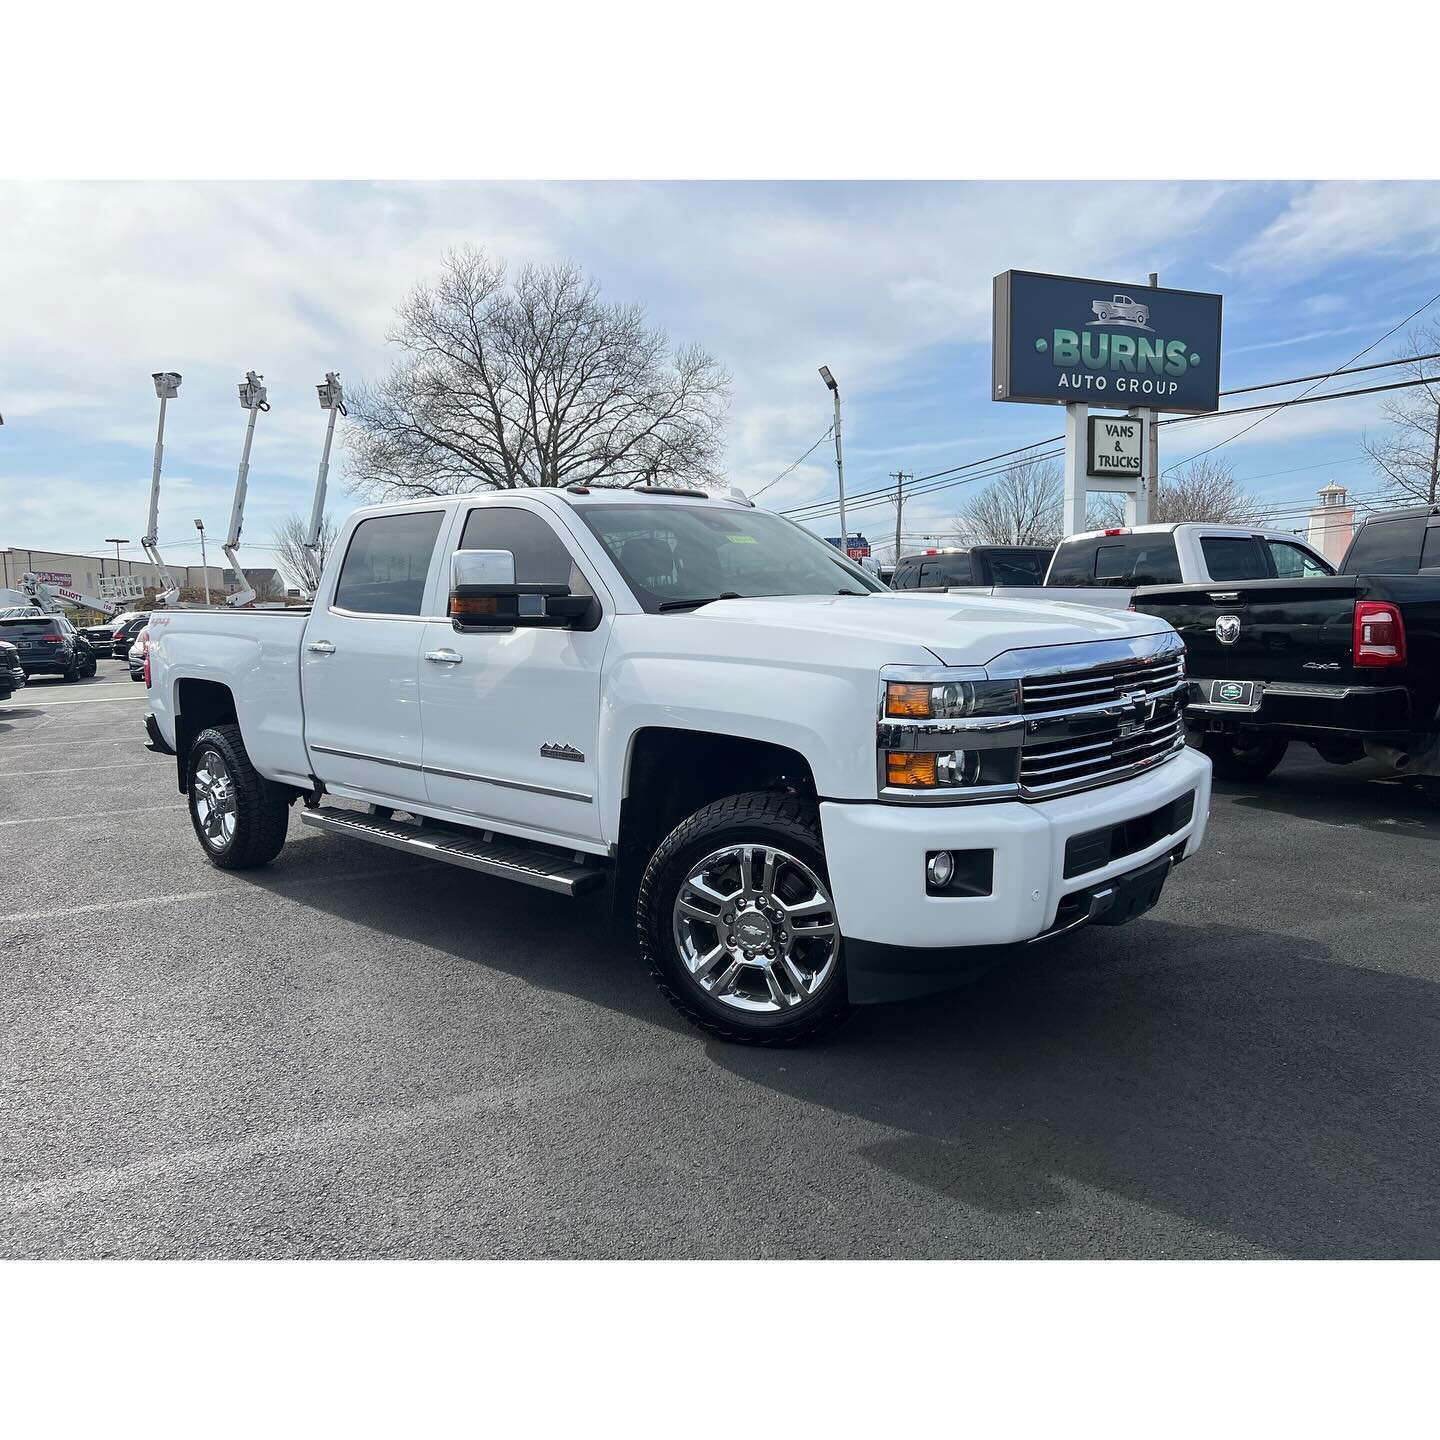 New Inventory ⬇️
🚙 2017 Chevy Silverado 2500HD High Country 4x4
💥 119k Miles
💥 Leather, Navigation, Heated &amp; Cooled Seats
💥 20&rdquo; Chrome Wheels
💥 Gas 6.0L V8
▫️
▫️
▫️
▫️
#chevytrucks #chevy #highcountry #chevrolet #chevroletsilverado #ch